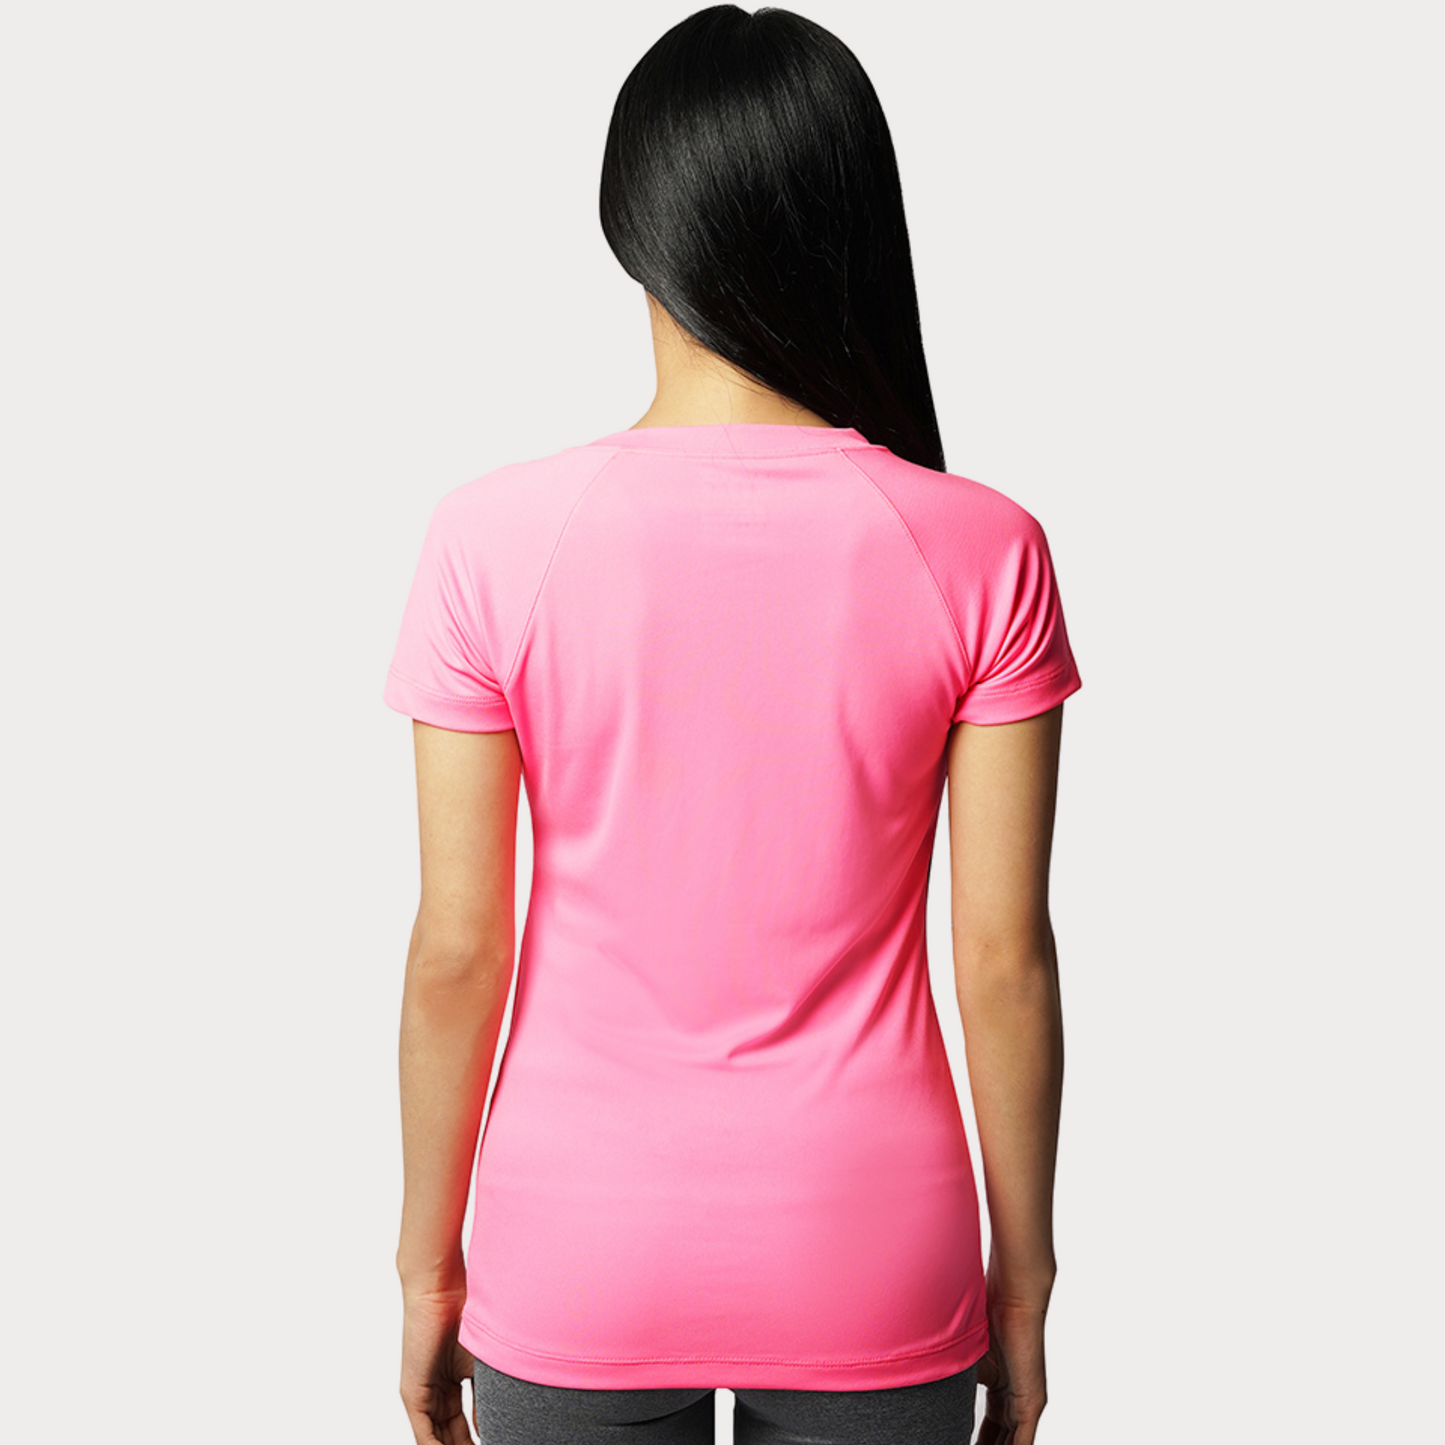 Short Sleeve Activewear / Sportswear - Women's Classic V-Neck Shirt - S / Washed Neon Pink - Outperformer